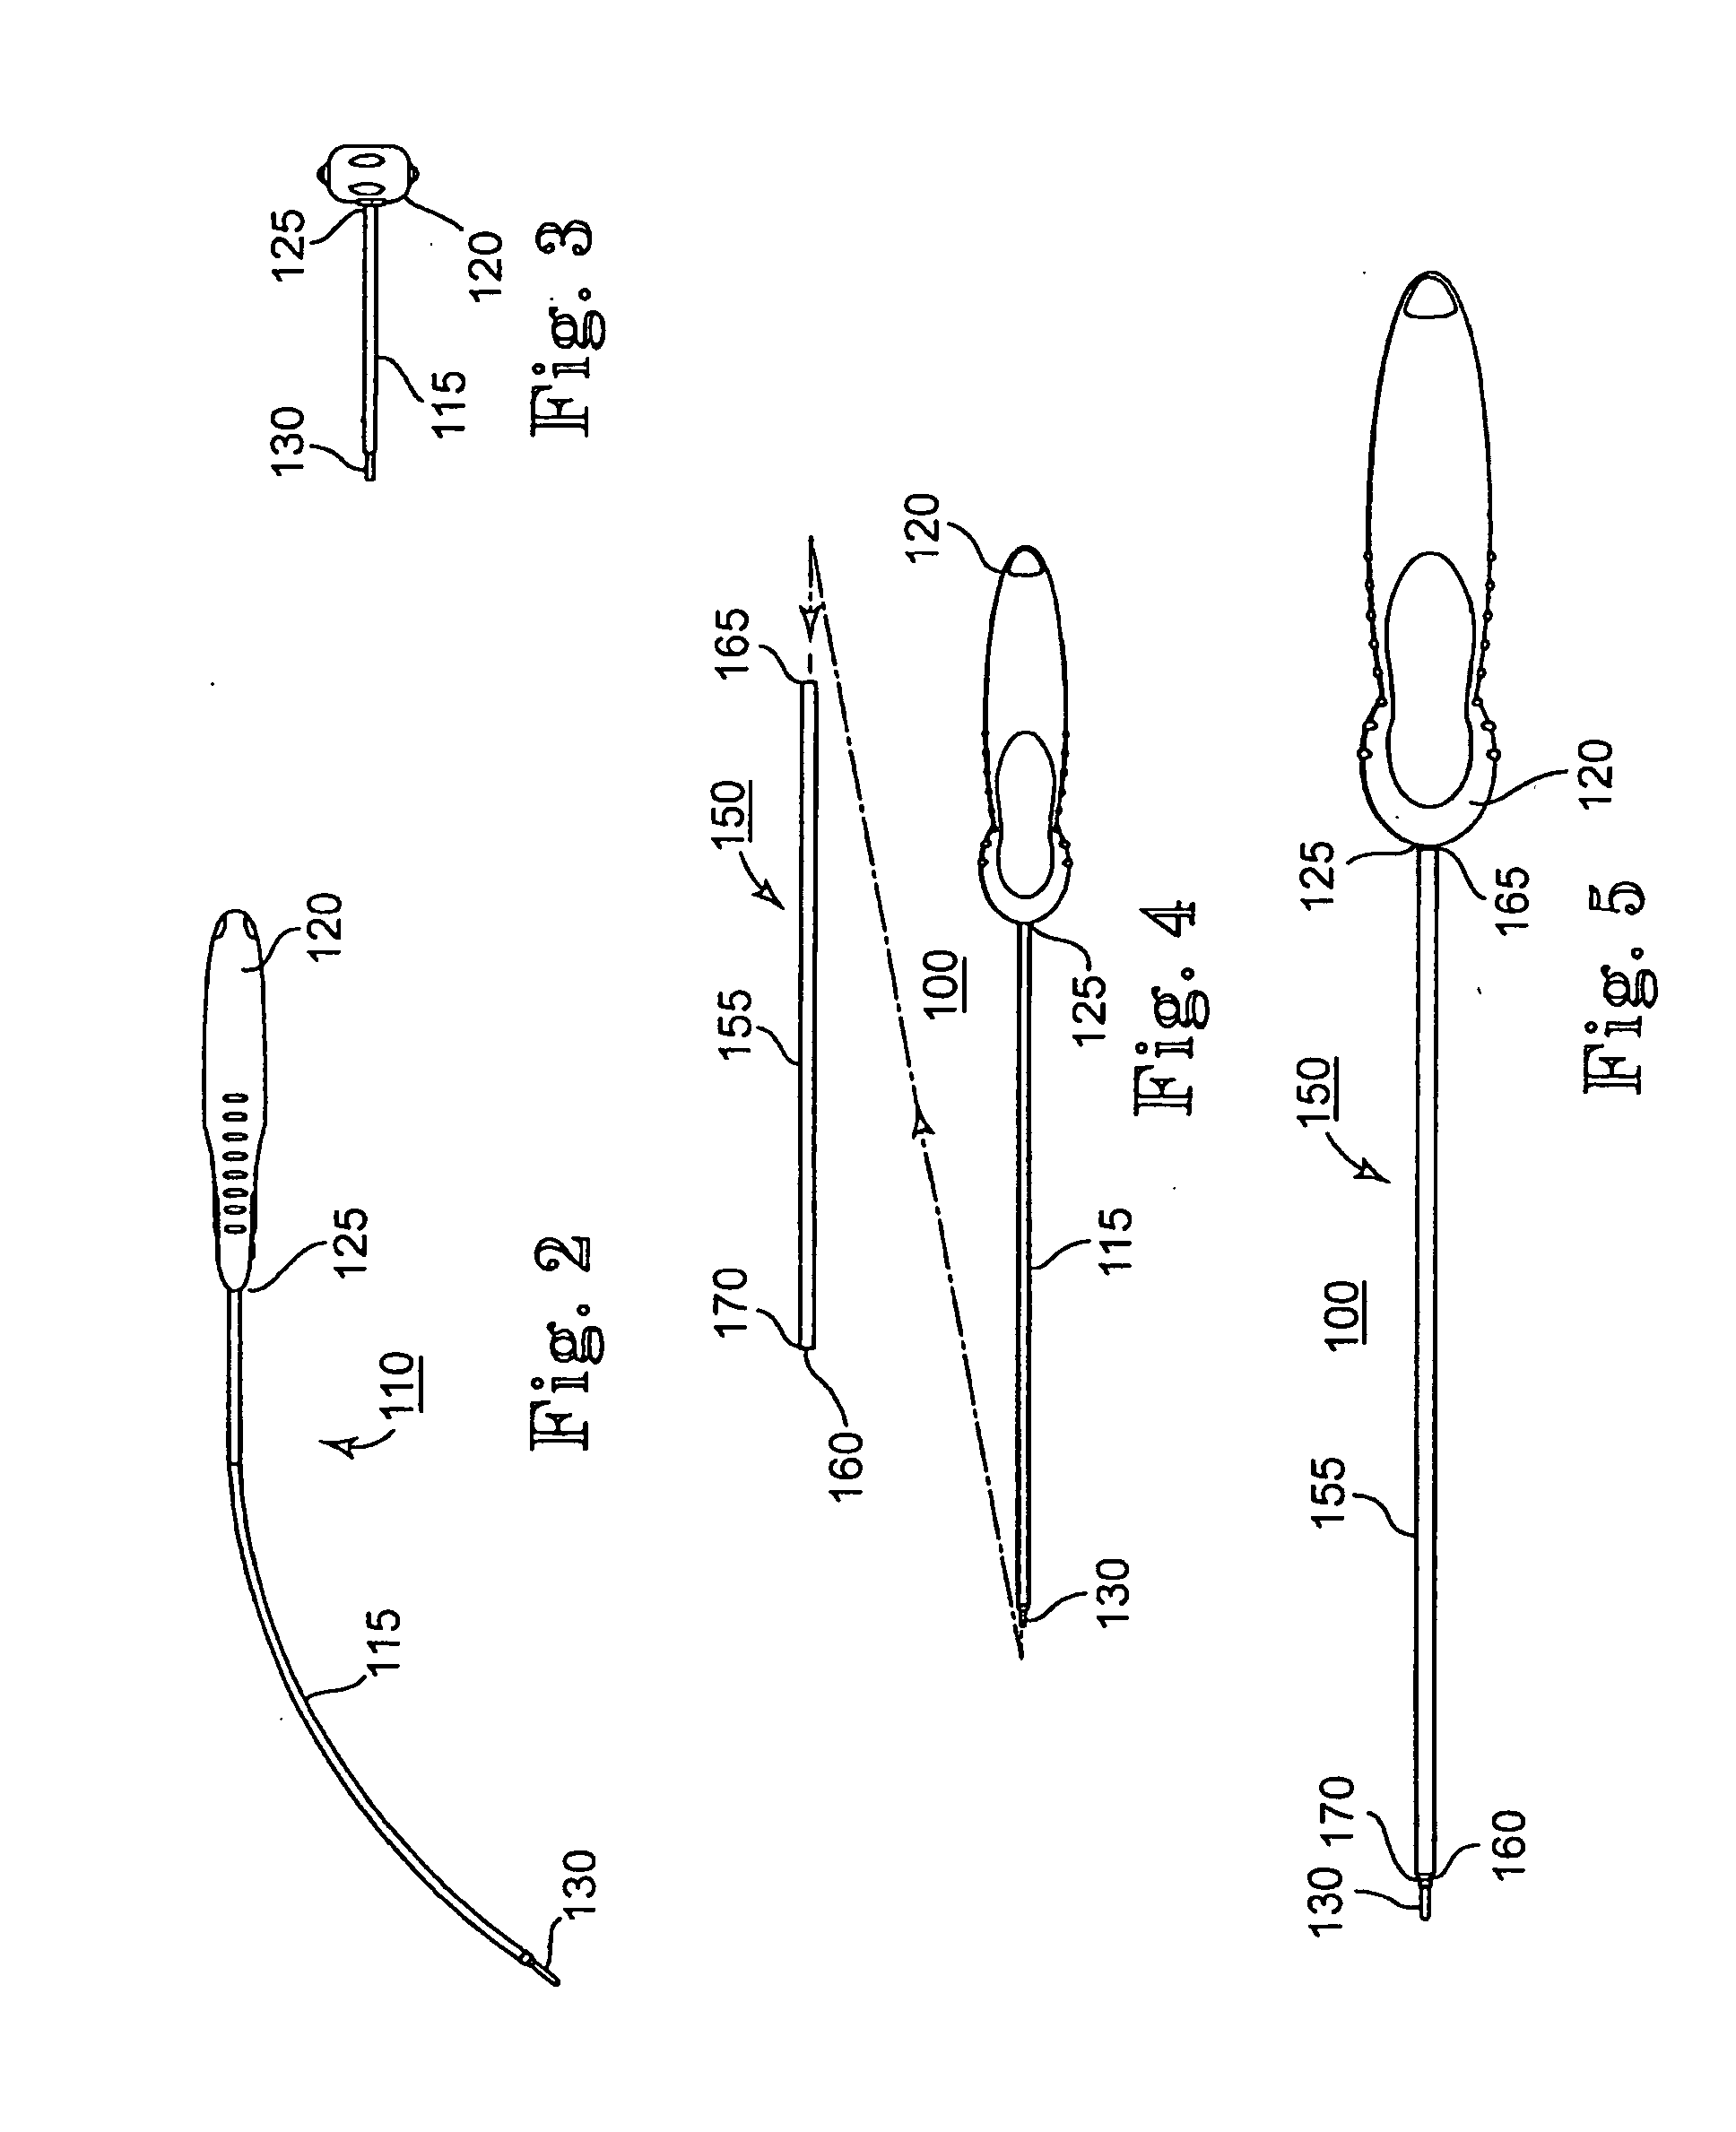 Systems and Methods for Implanting Medical Devices